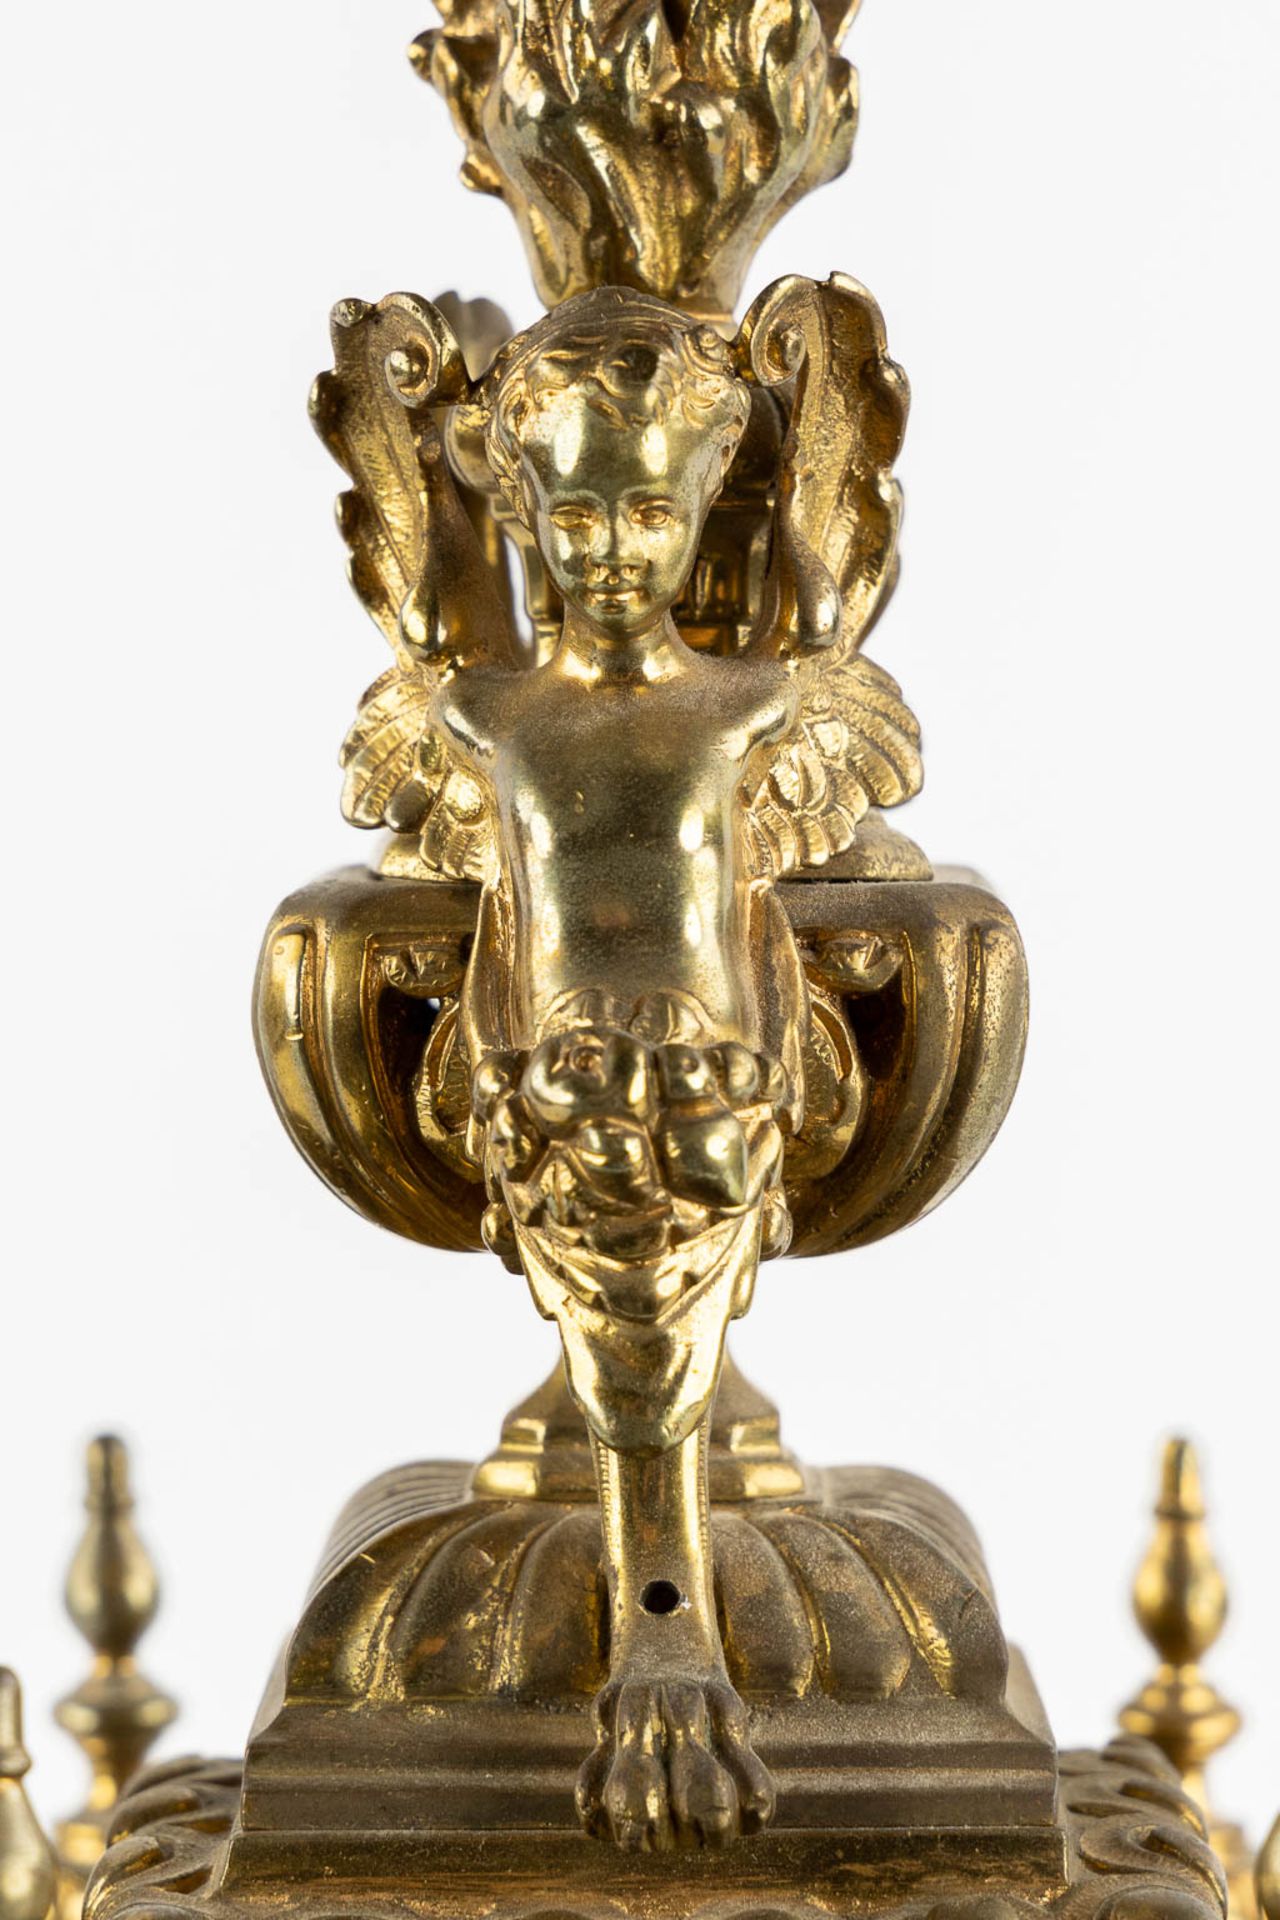 A mantle clock, bronze decorated with angels. Circa 1900. (L:21 x W:27 x H:54 cm) - Image 7 of 13